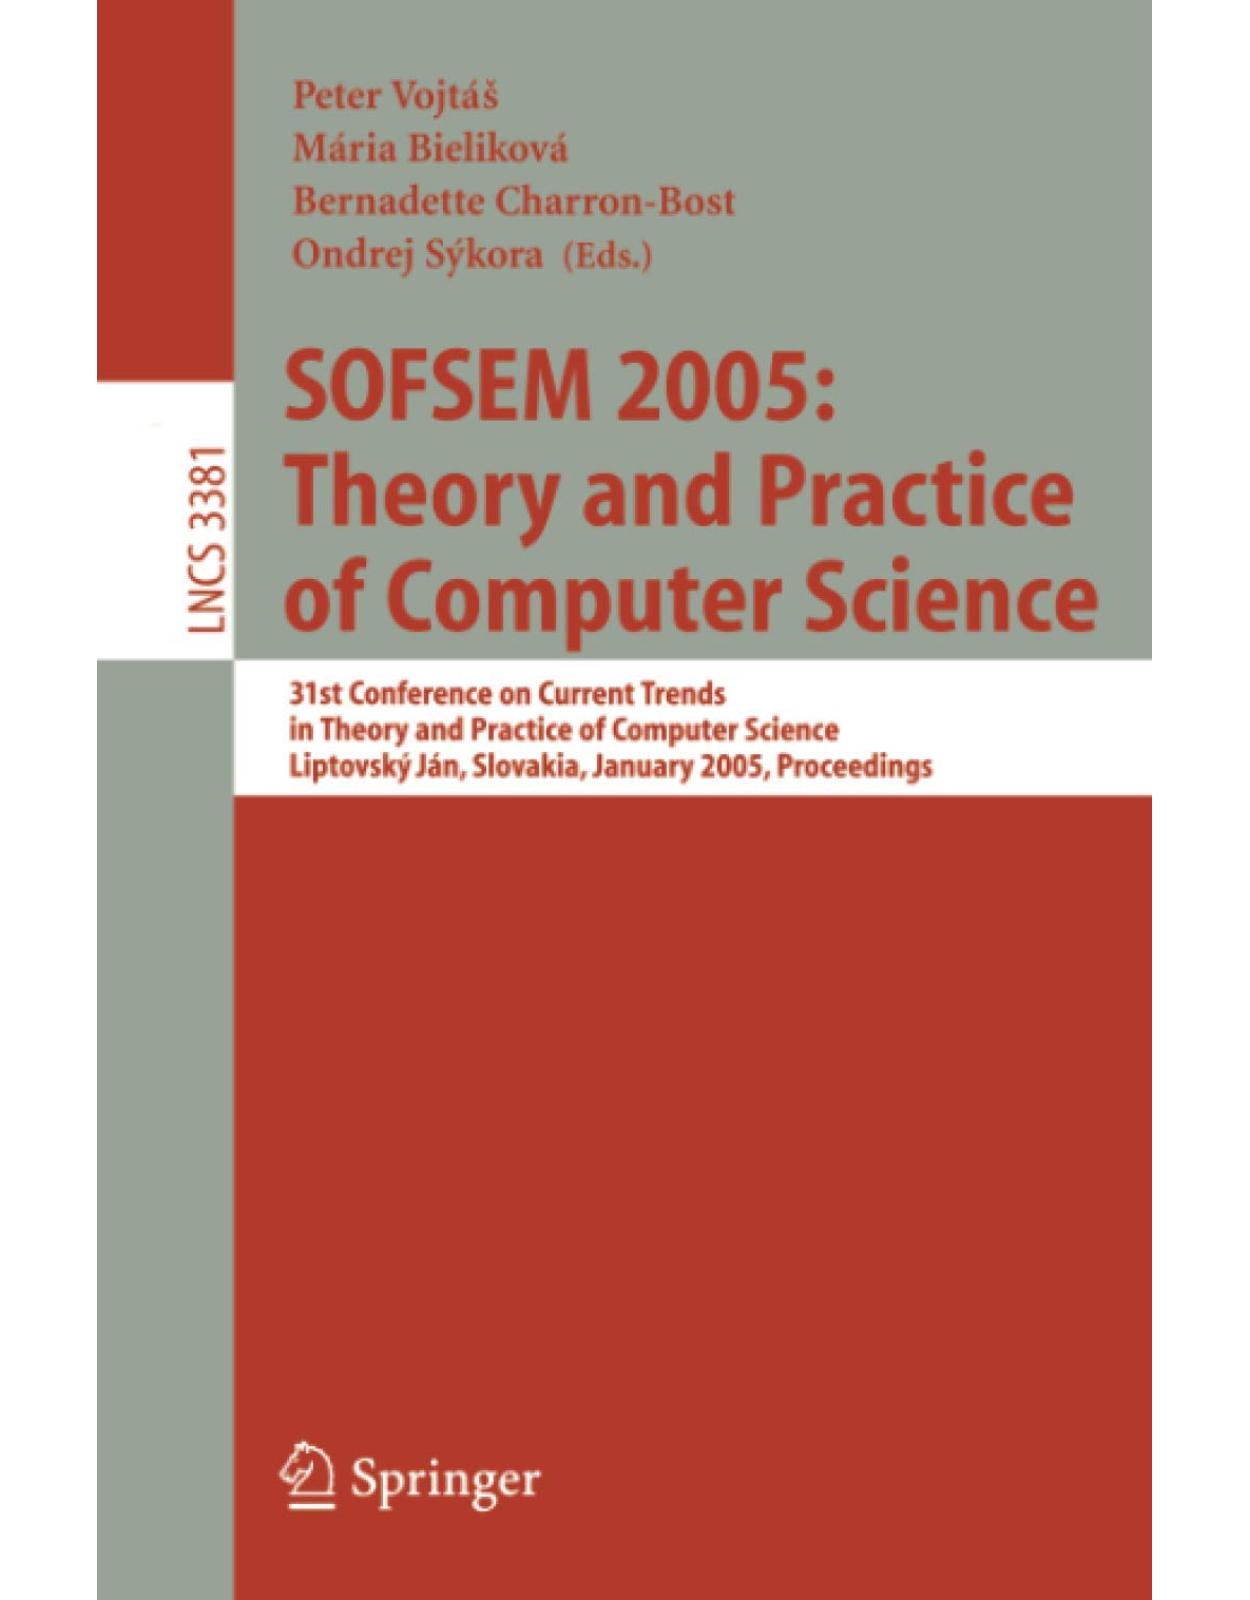 SOFSEM 2005: Theory and Practice of Computer Science